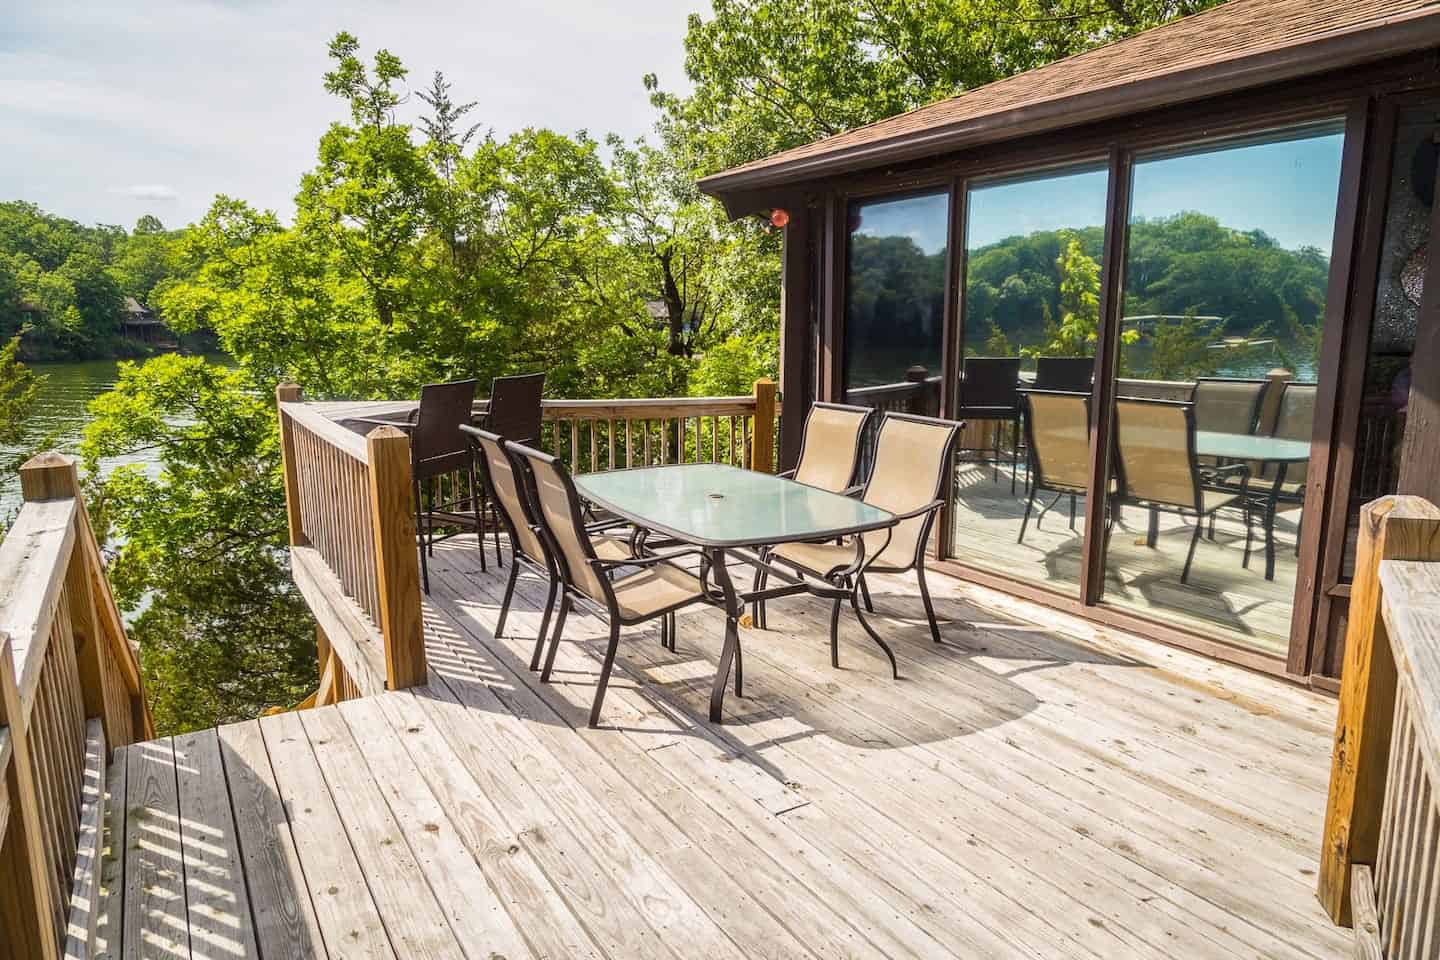 Image of Airbnb rental in Lake of the Ozarks, Missouri